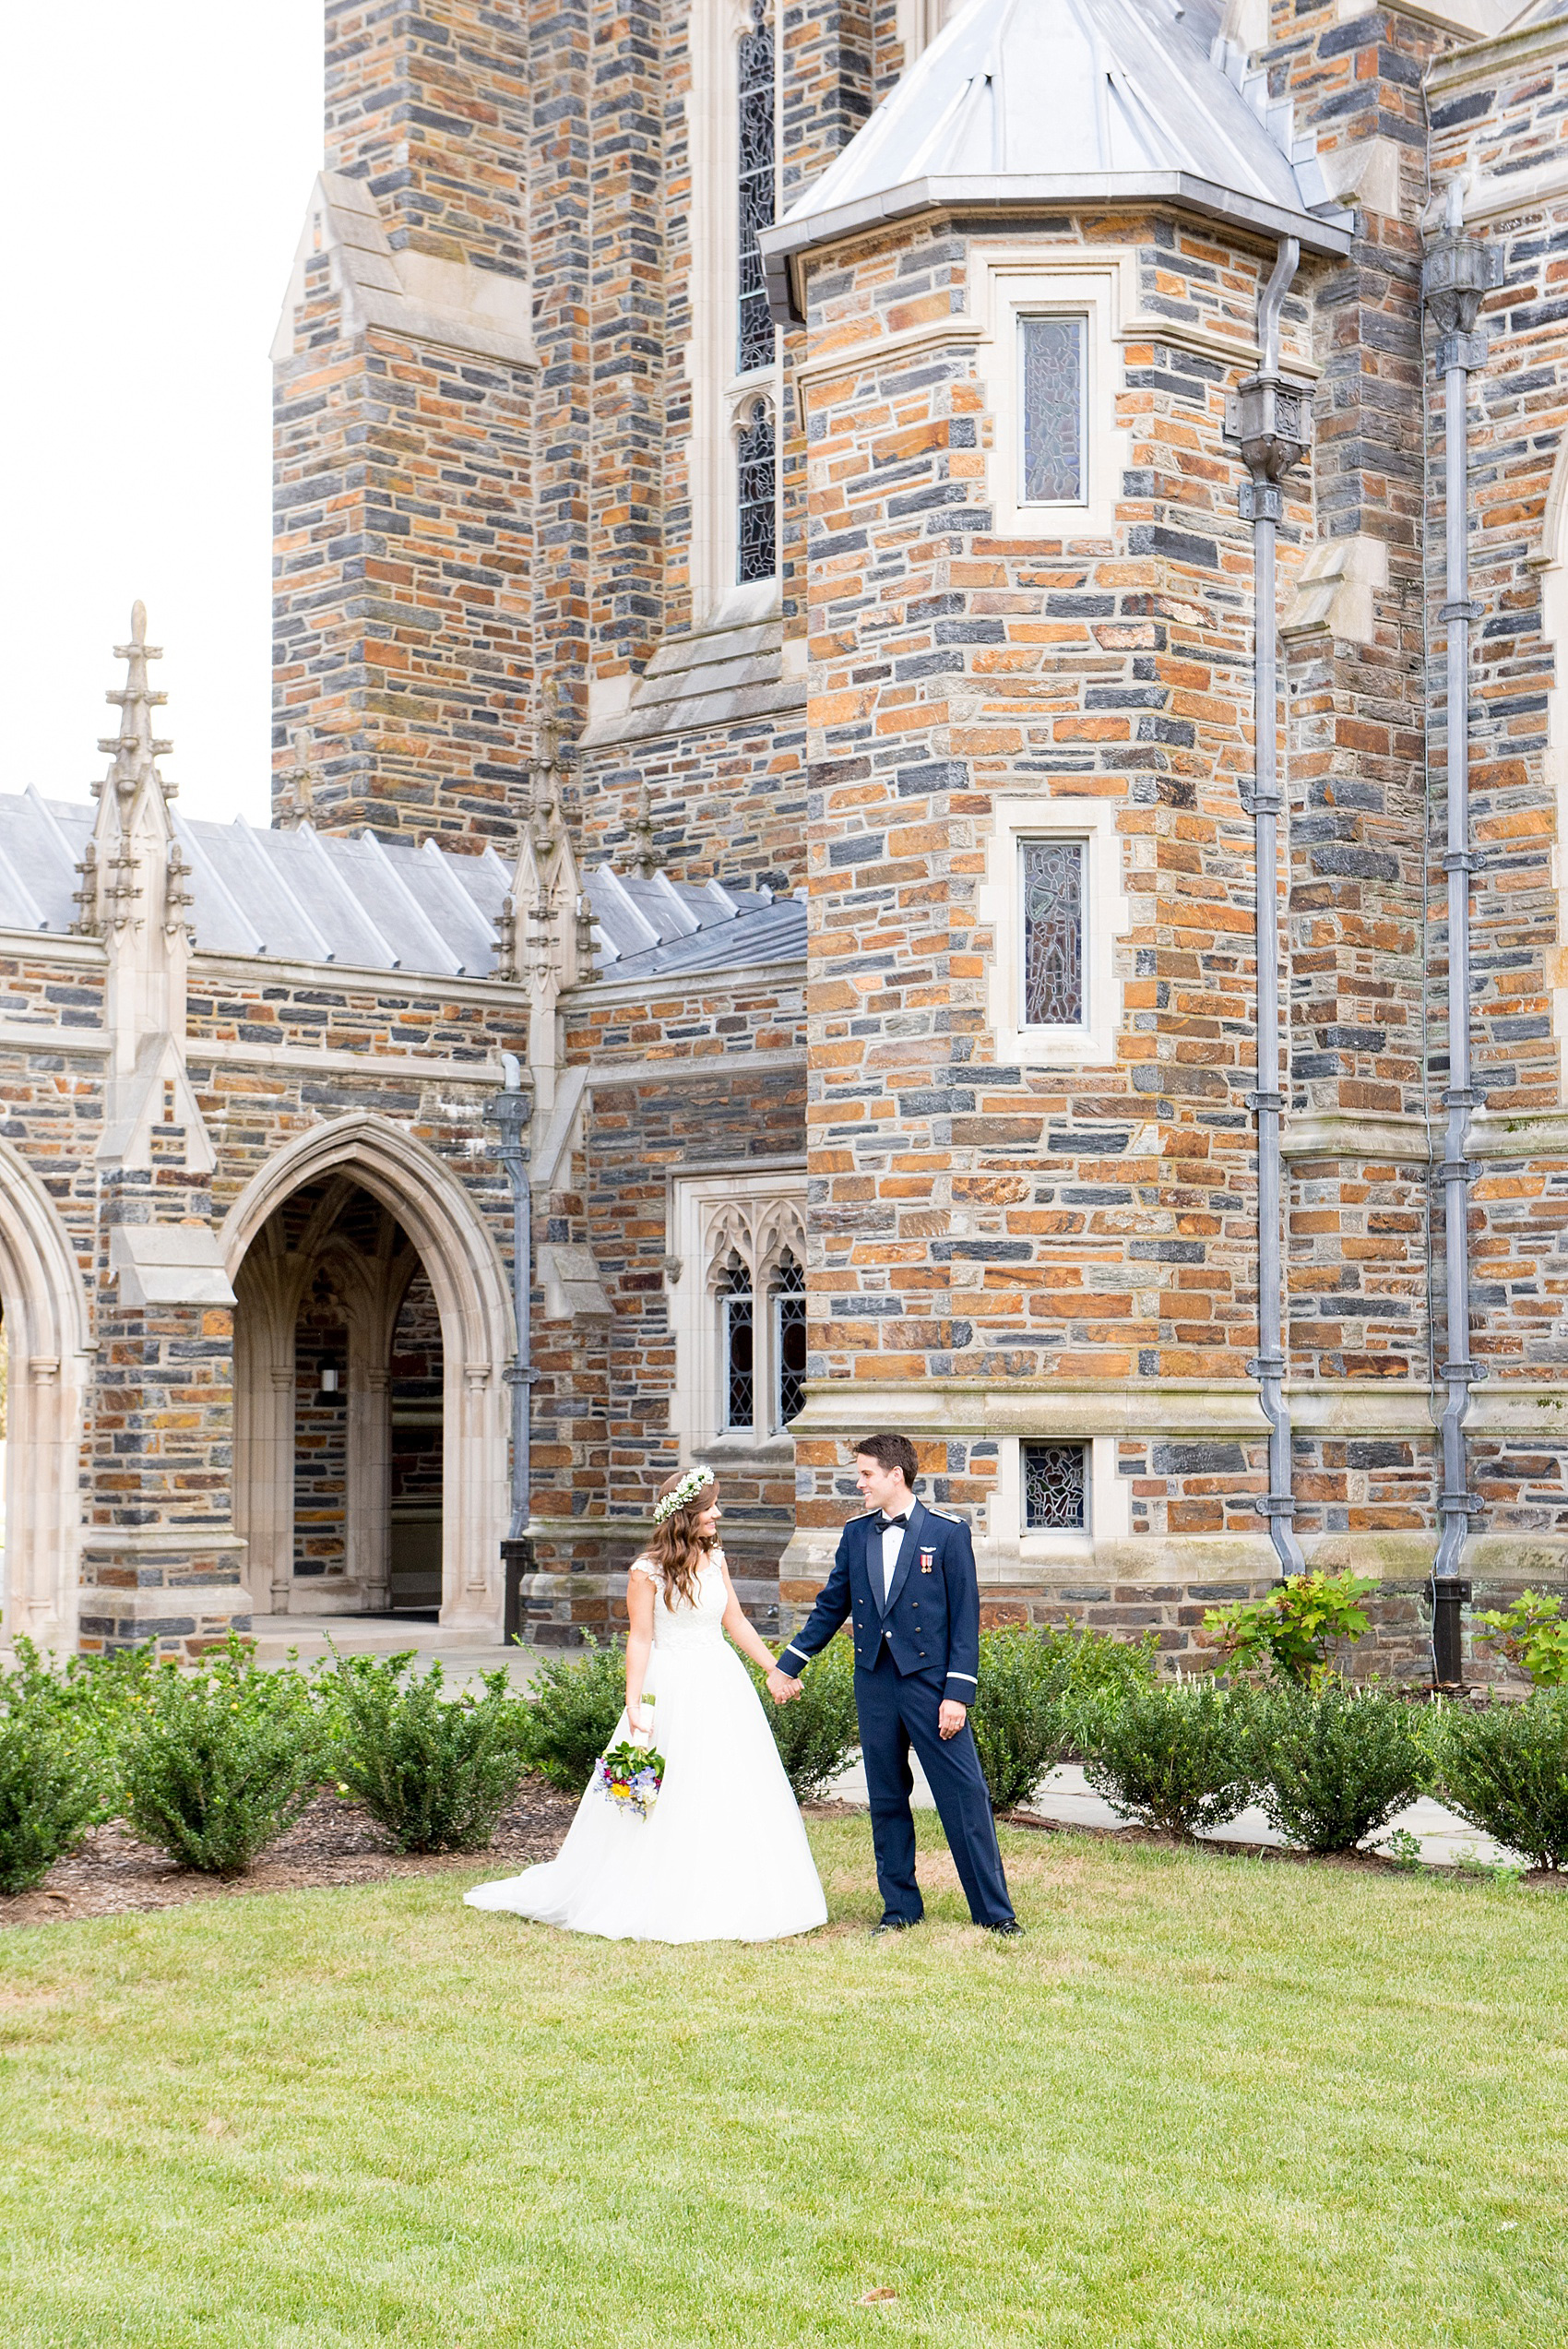 Mikkel Paige Photography photo of a Duke Chapel wedding in Durham, North Carolina. The bride and groom in front of the iconic gothic church.